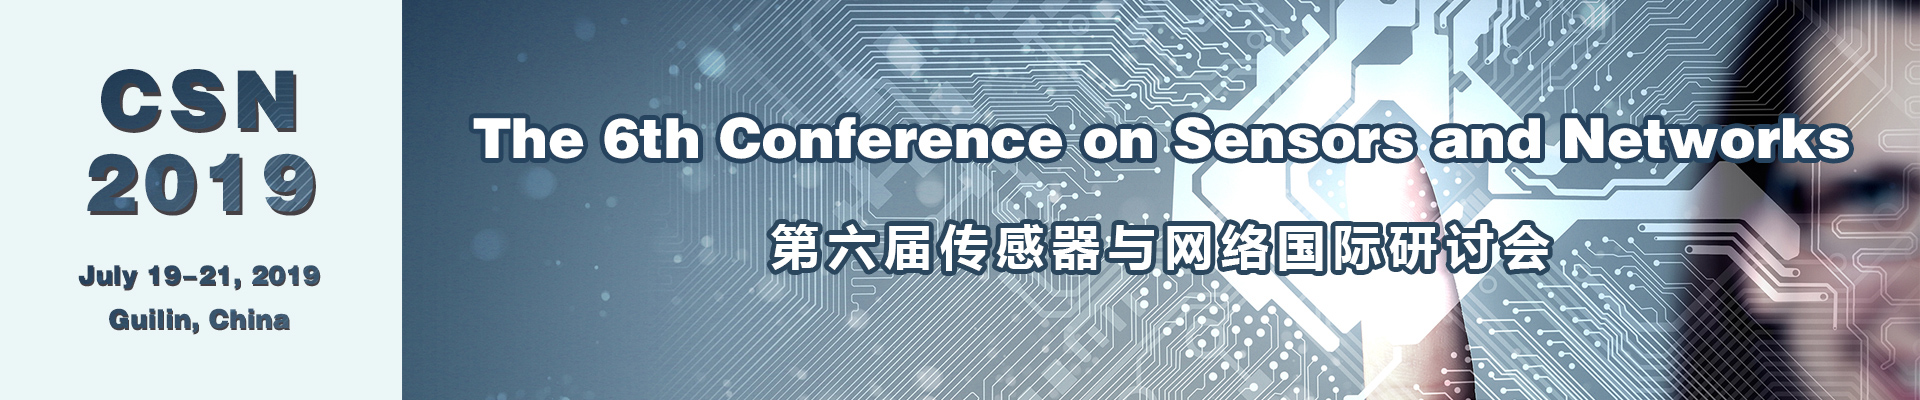 The 6th Conference on Sensors and Networks (CSN 2019), Guilin, Guangxi, China